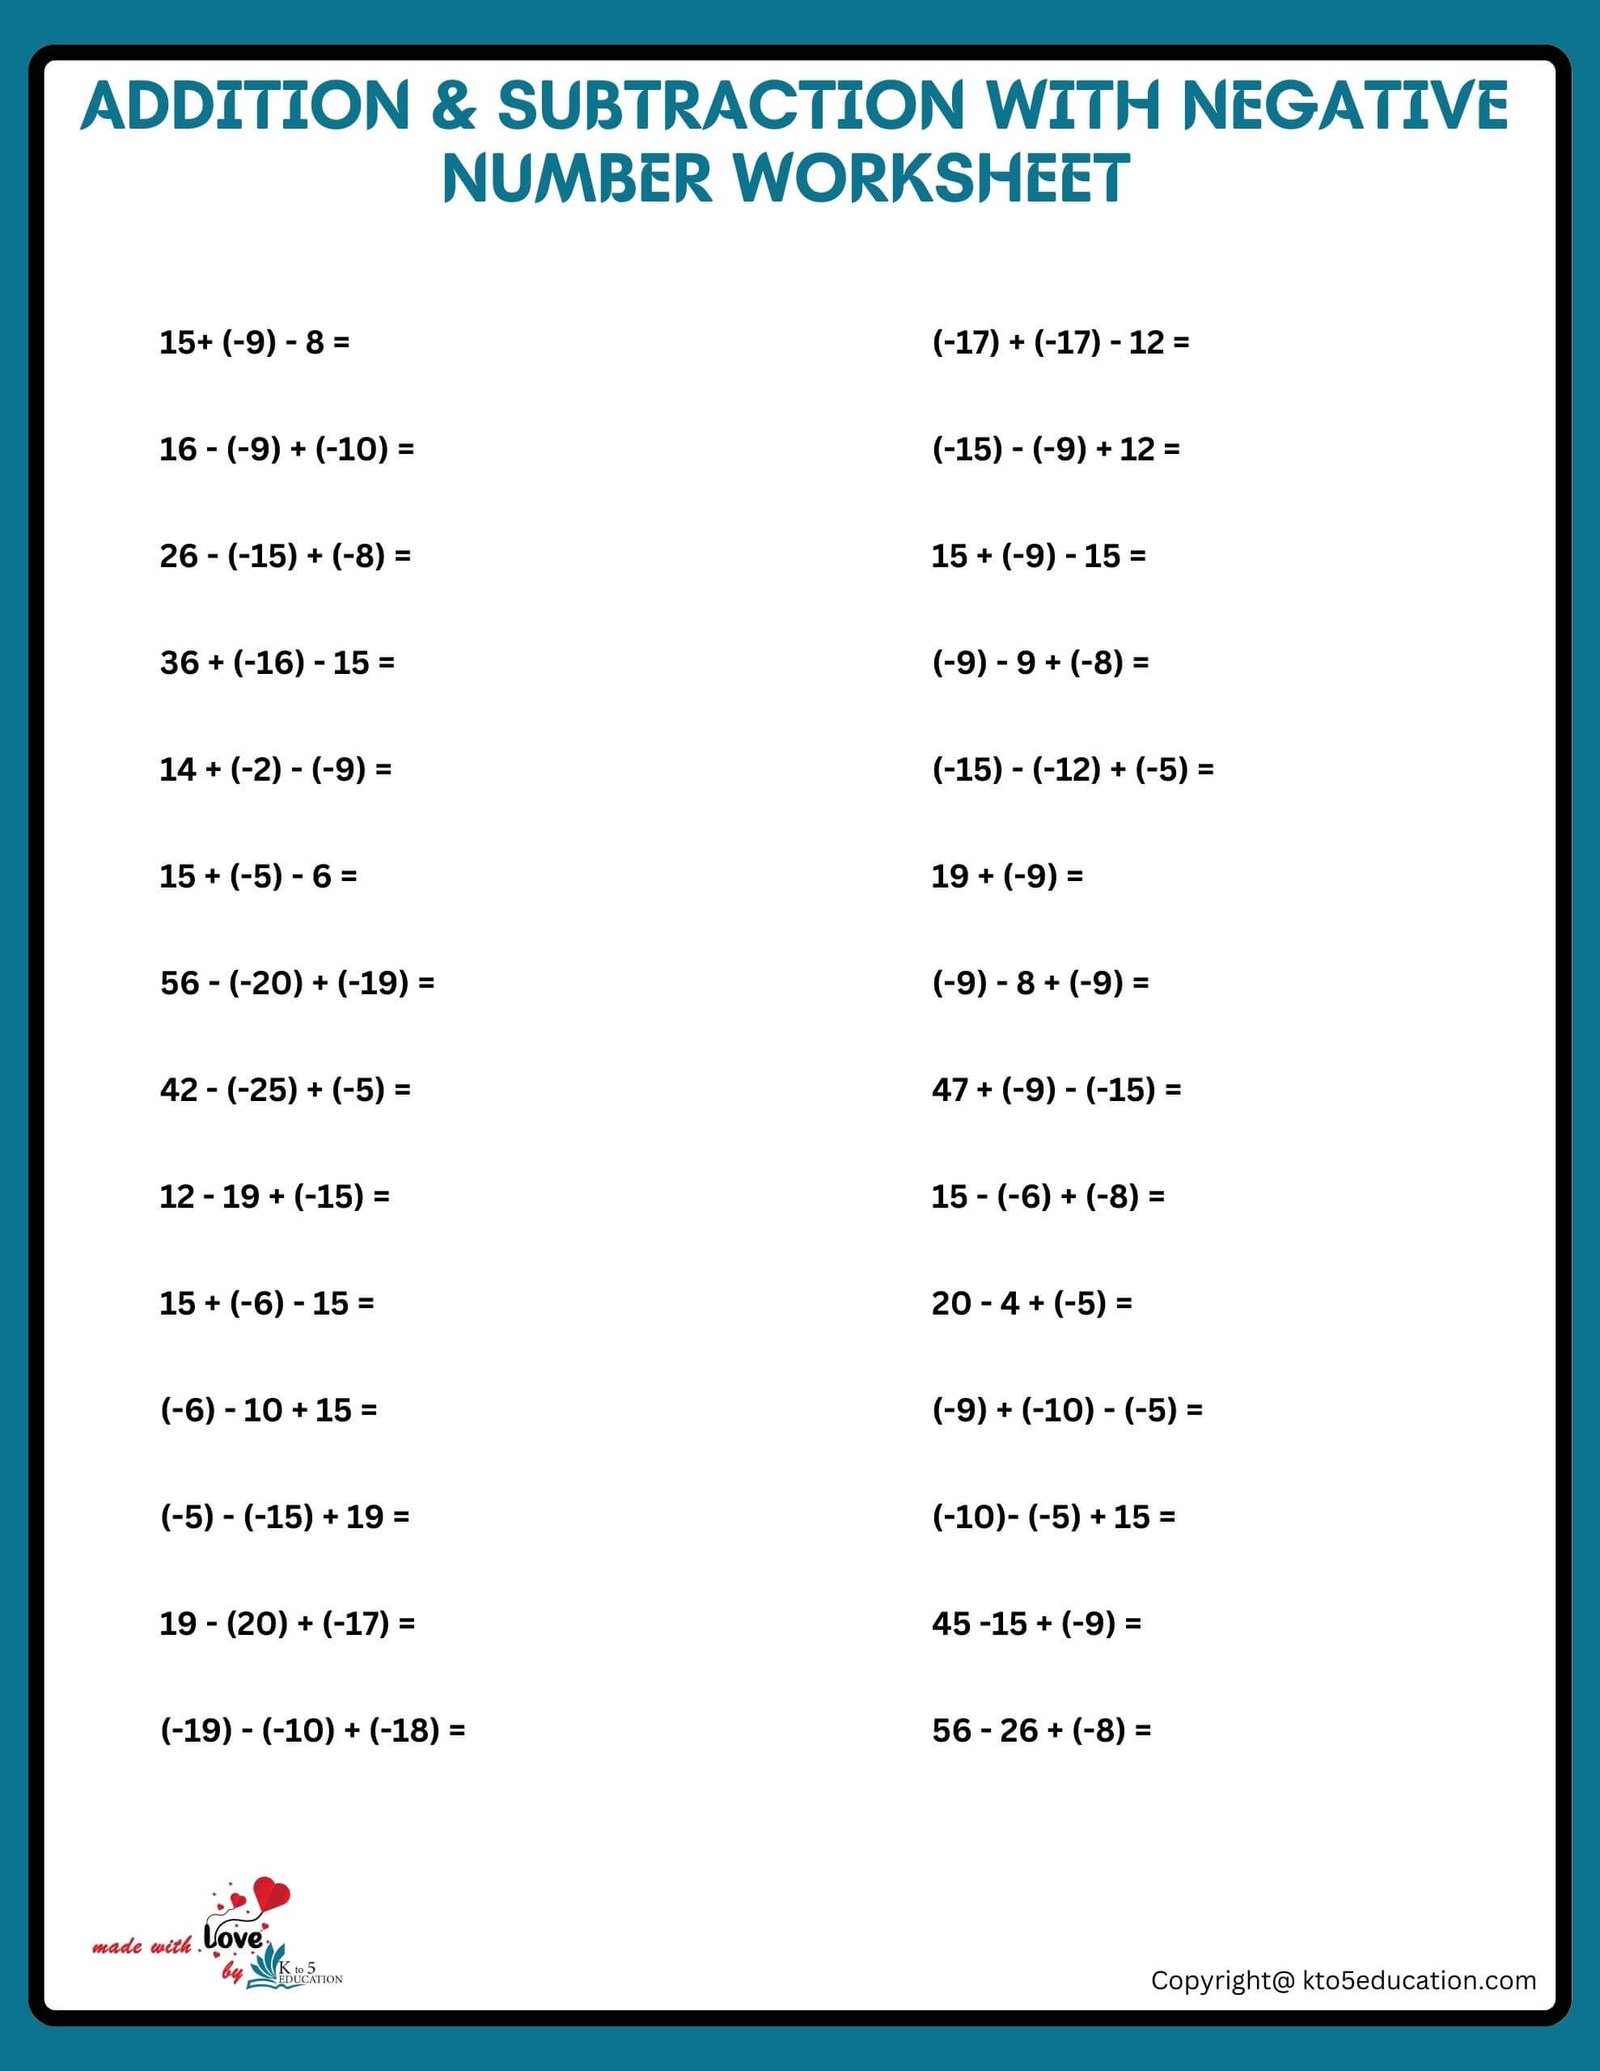 Addition And Subtraction Of Mixed Numbers Worksheets